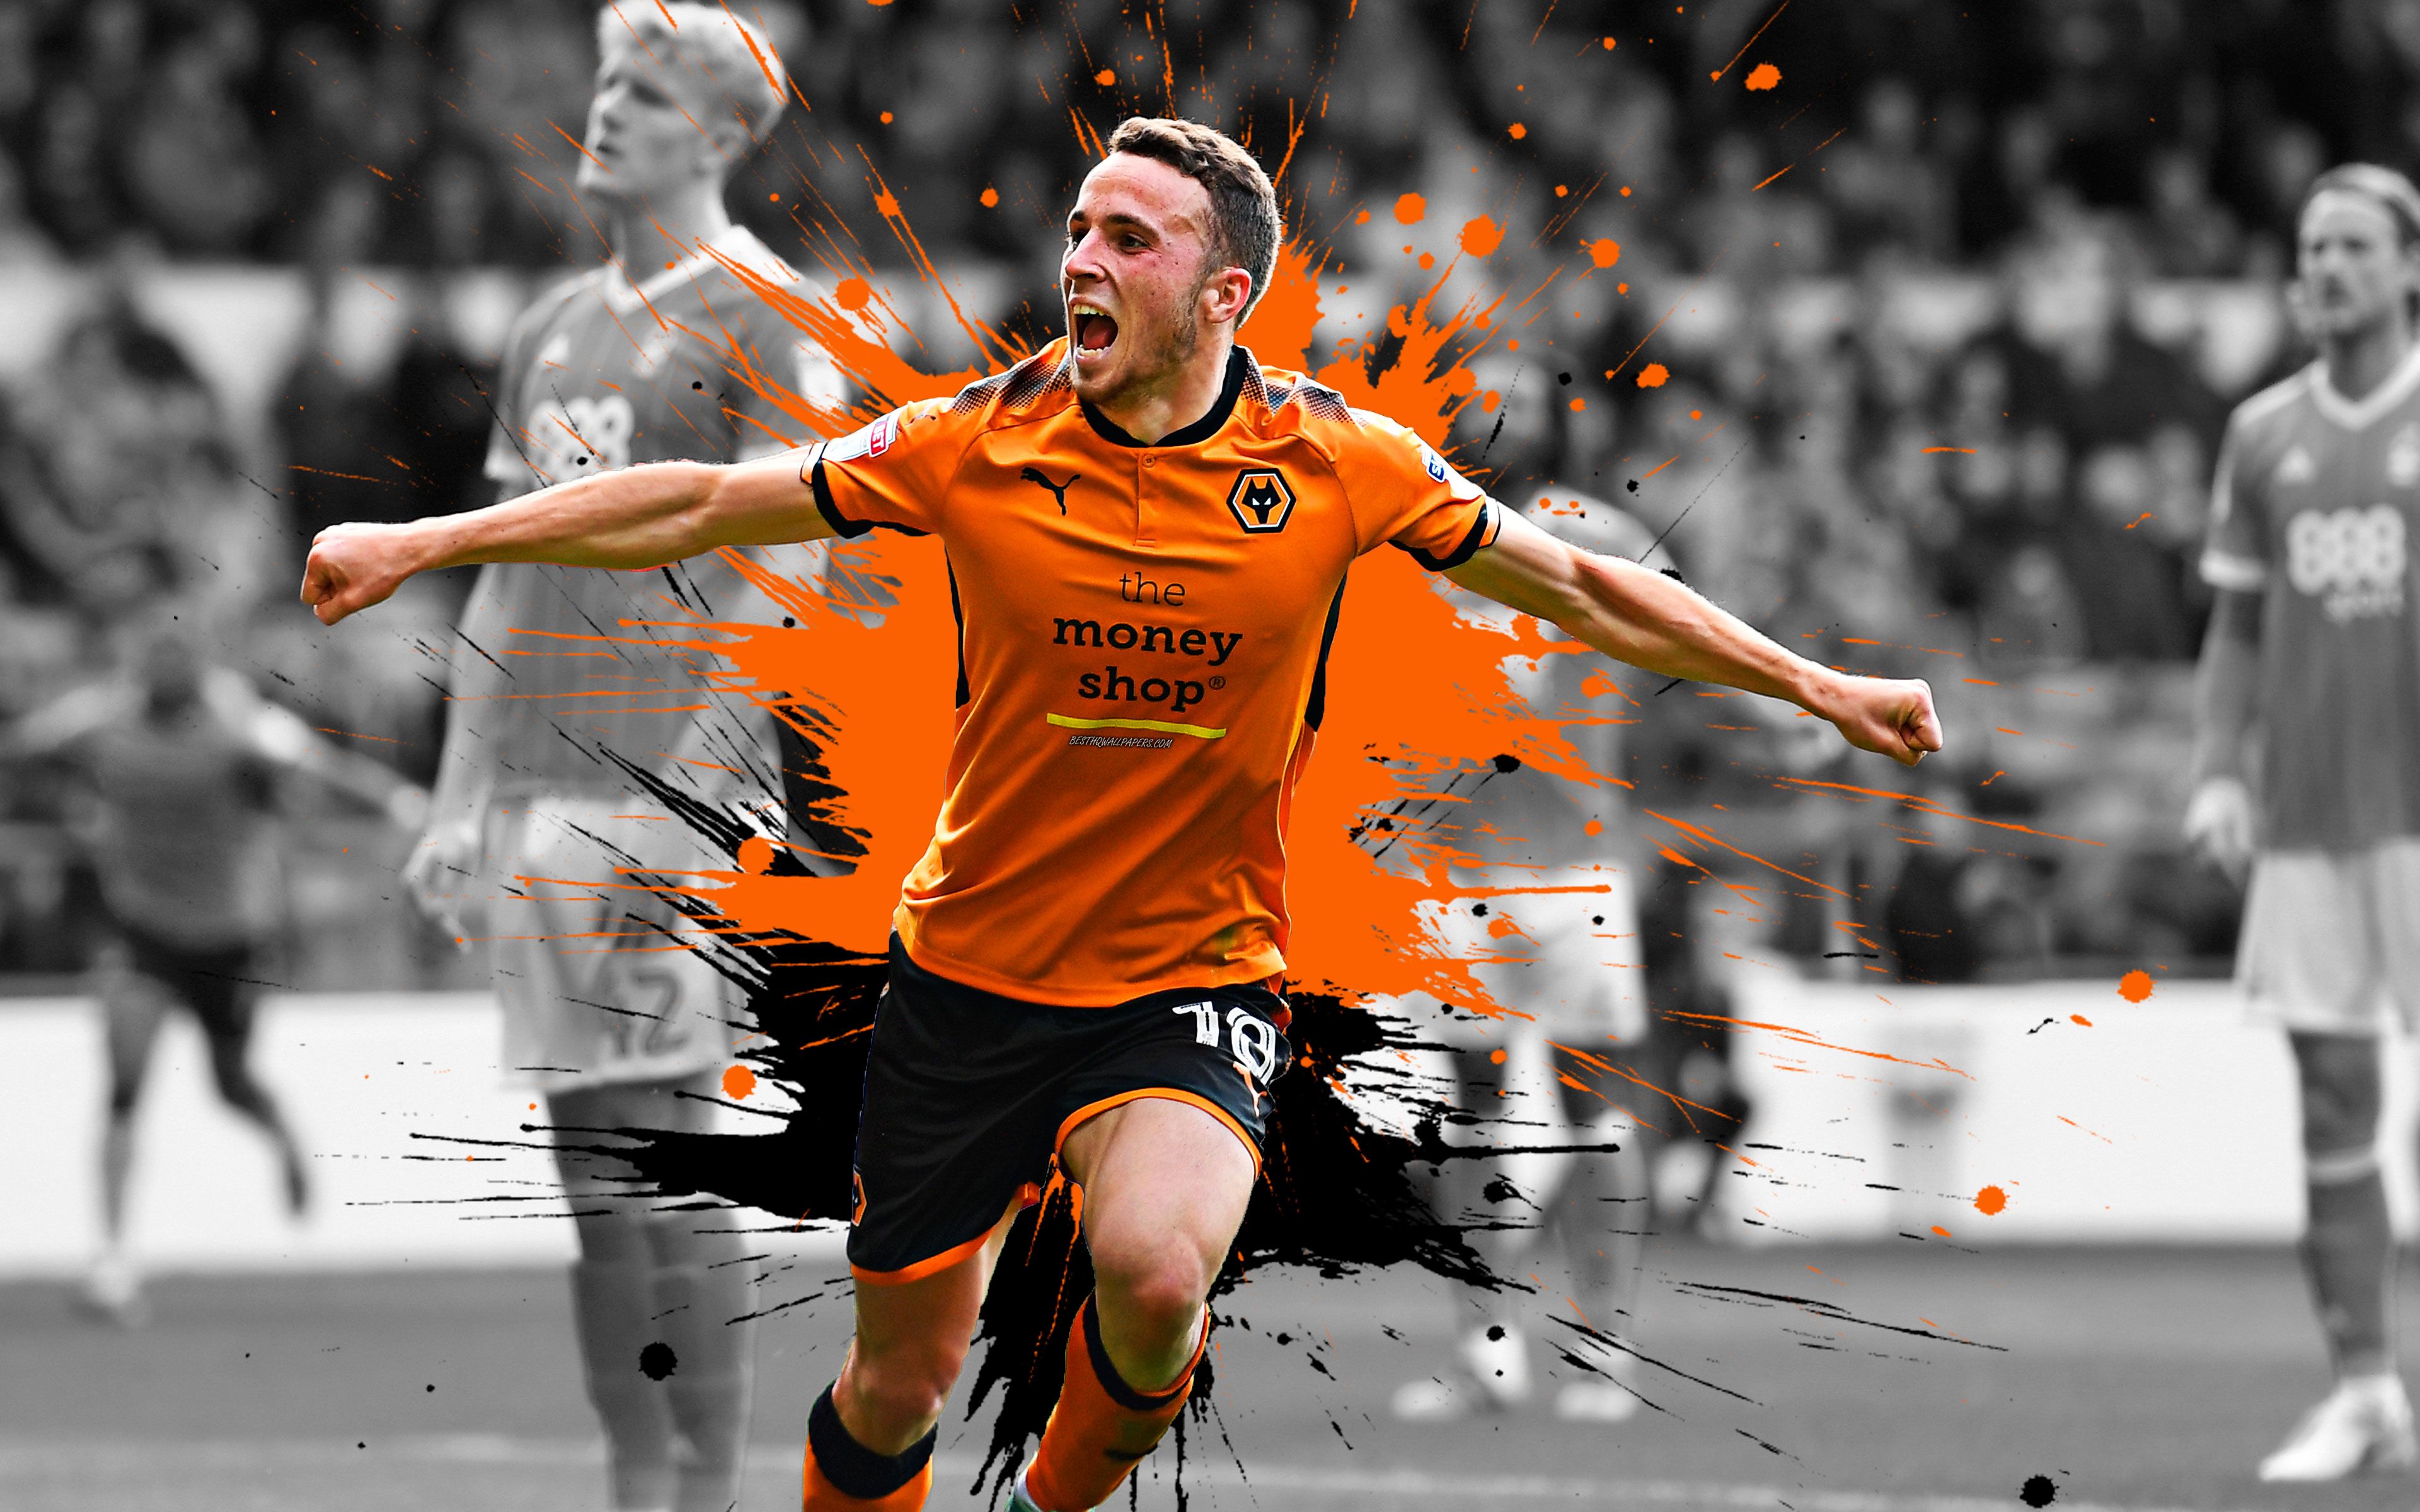 Download wallpaper Diogo Jota, 4k, art, Wolverhampton Wanderers FC, Portuguese football player, splashes of paint, grunge art, creative art, Premier League, England, football for desktop with resolution 3840x2400. High Quality HD picture